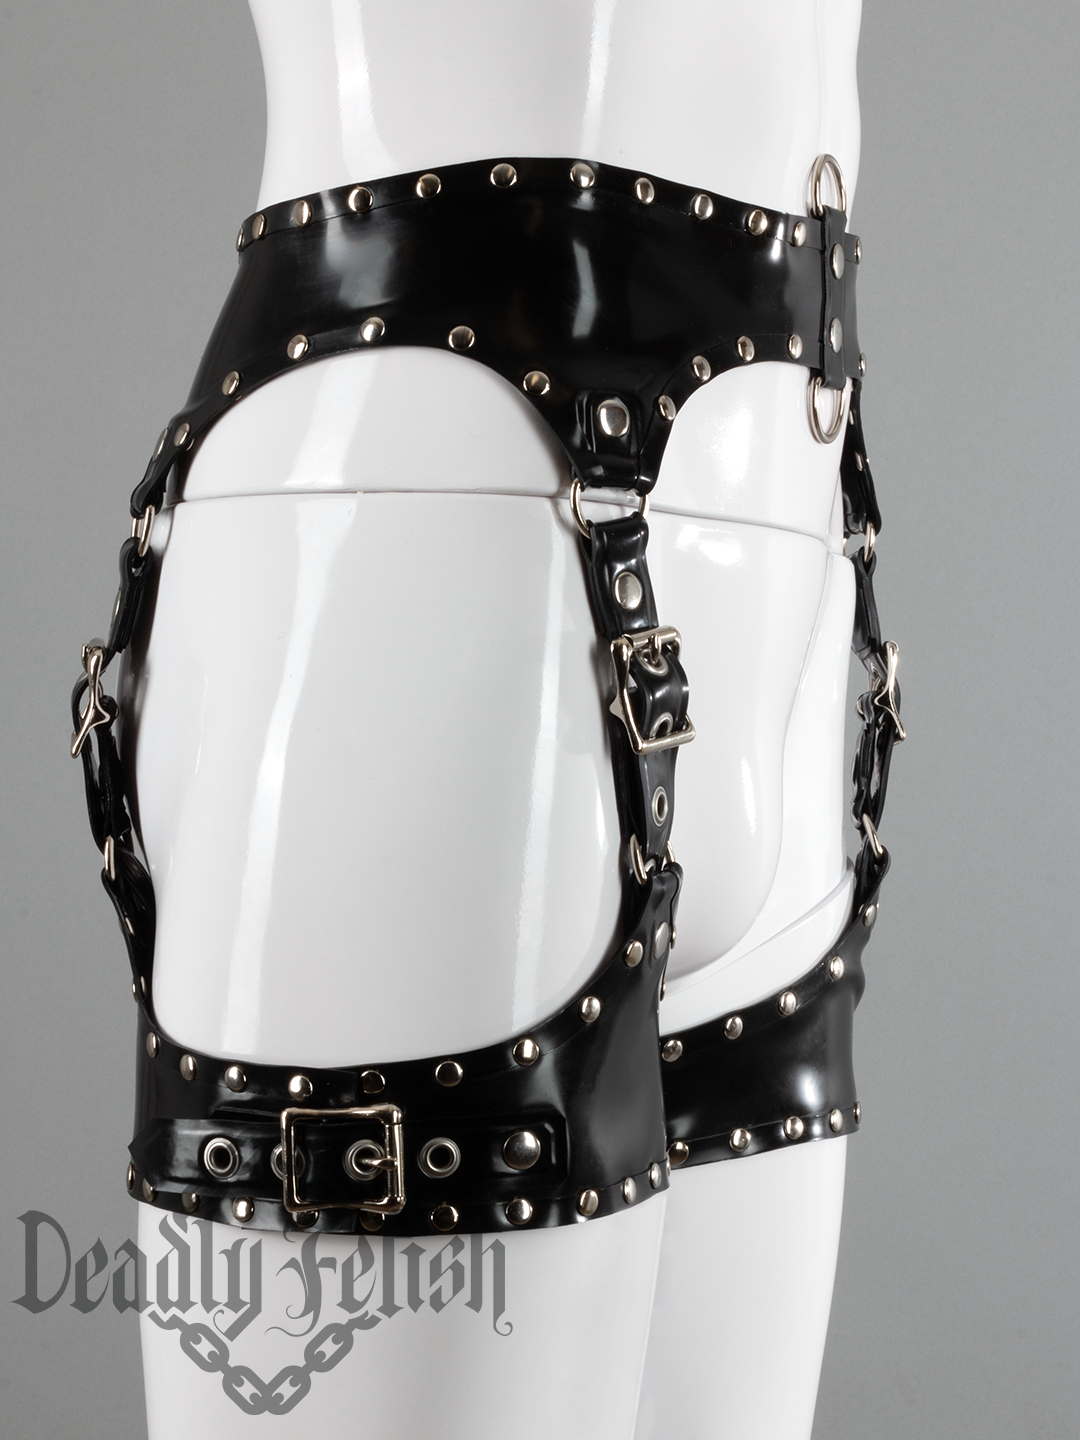 Deadly Fetish Made-To-Order Latex: Harness Addition #14 Single Buckle Leg Braces with Rivets